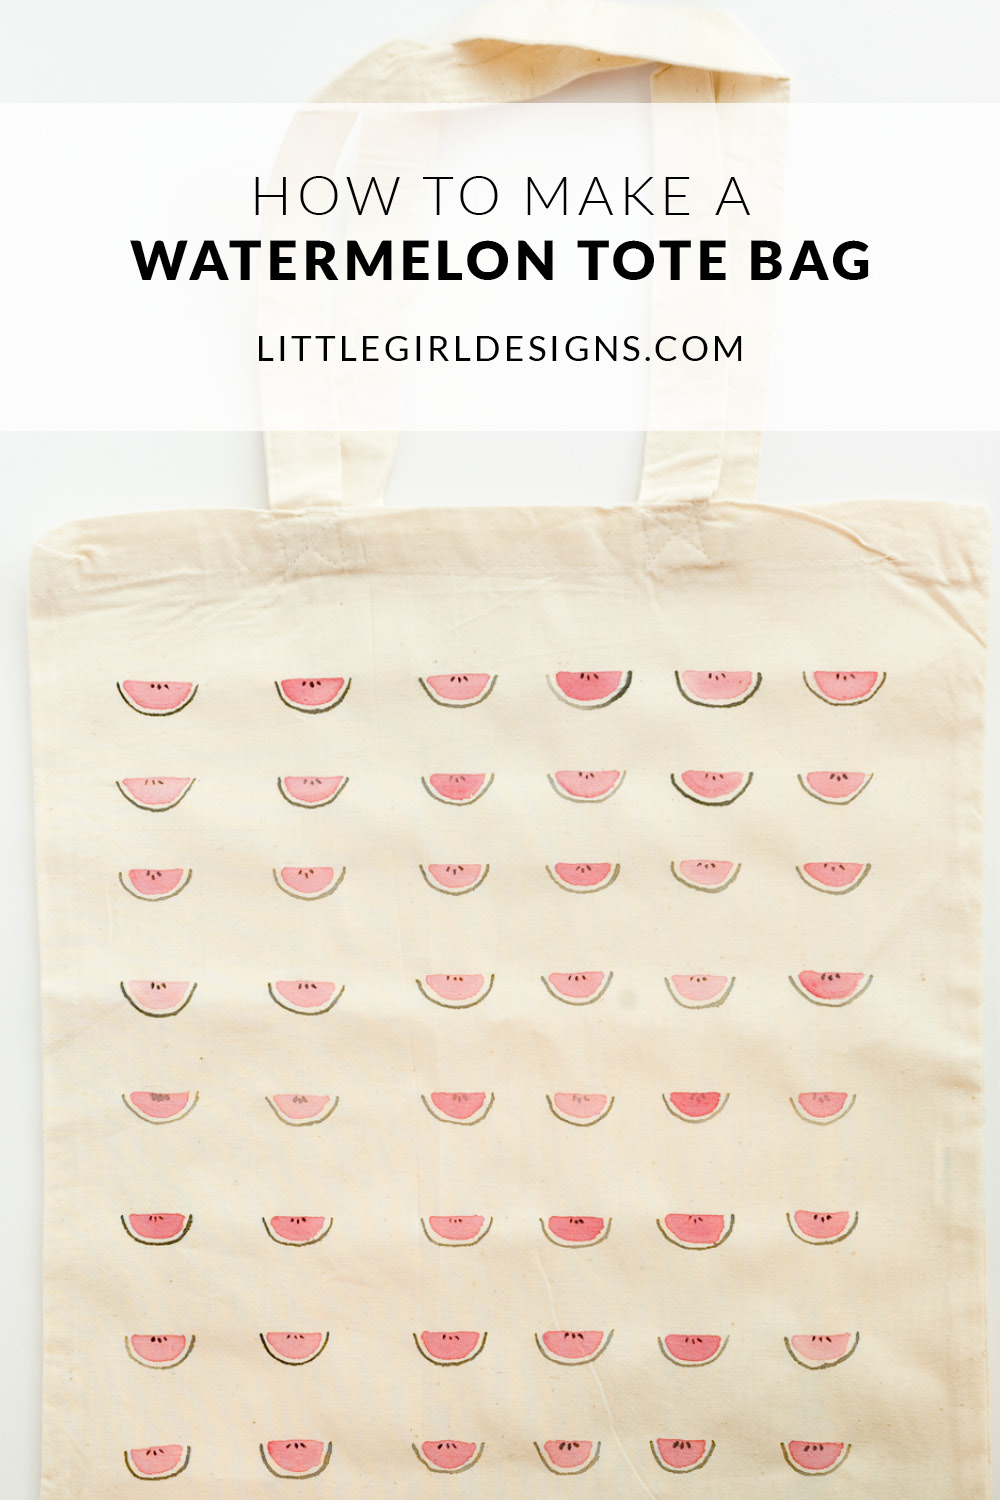 Summer's here and what better way to celebrate than to make this sweet watermelon tote bag! You can whip it up in an afternoon and use it all summer long to carry summer novels from the library and delicious produce from the farmer's market. :)